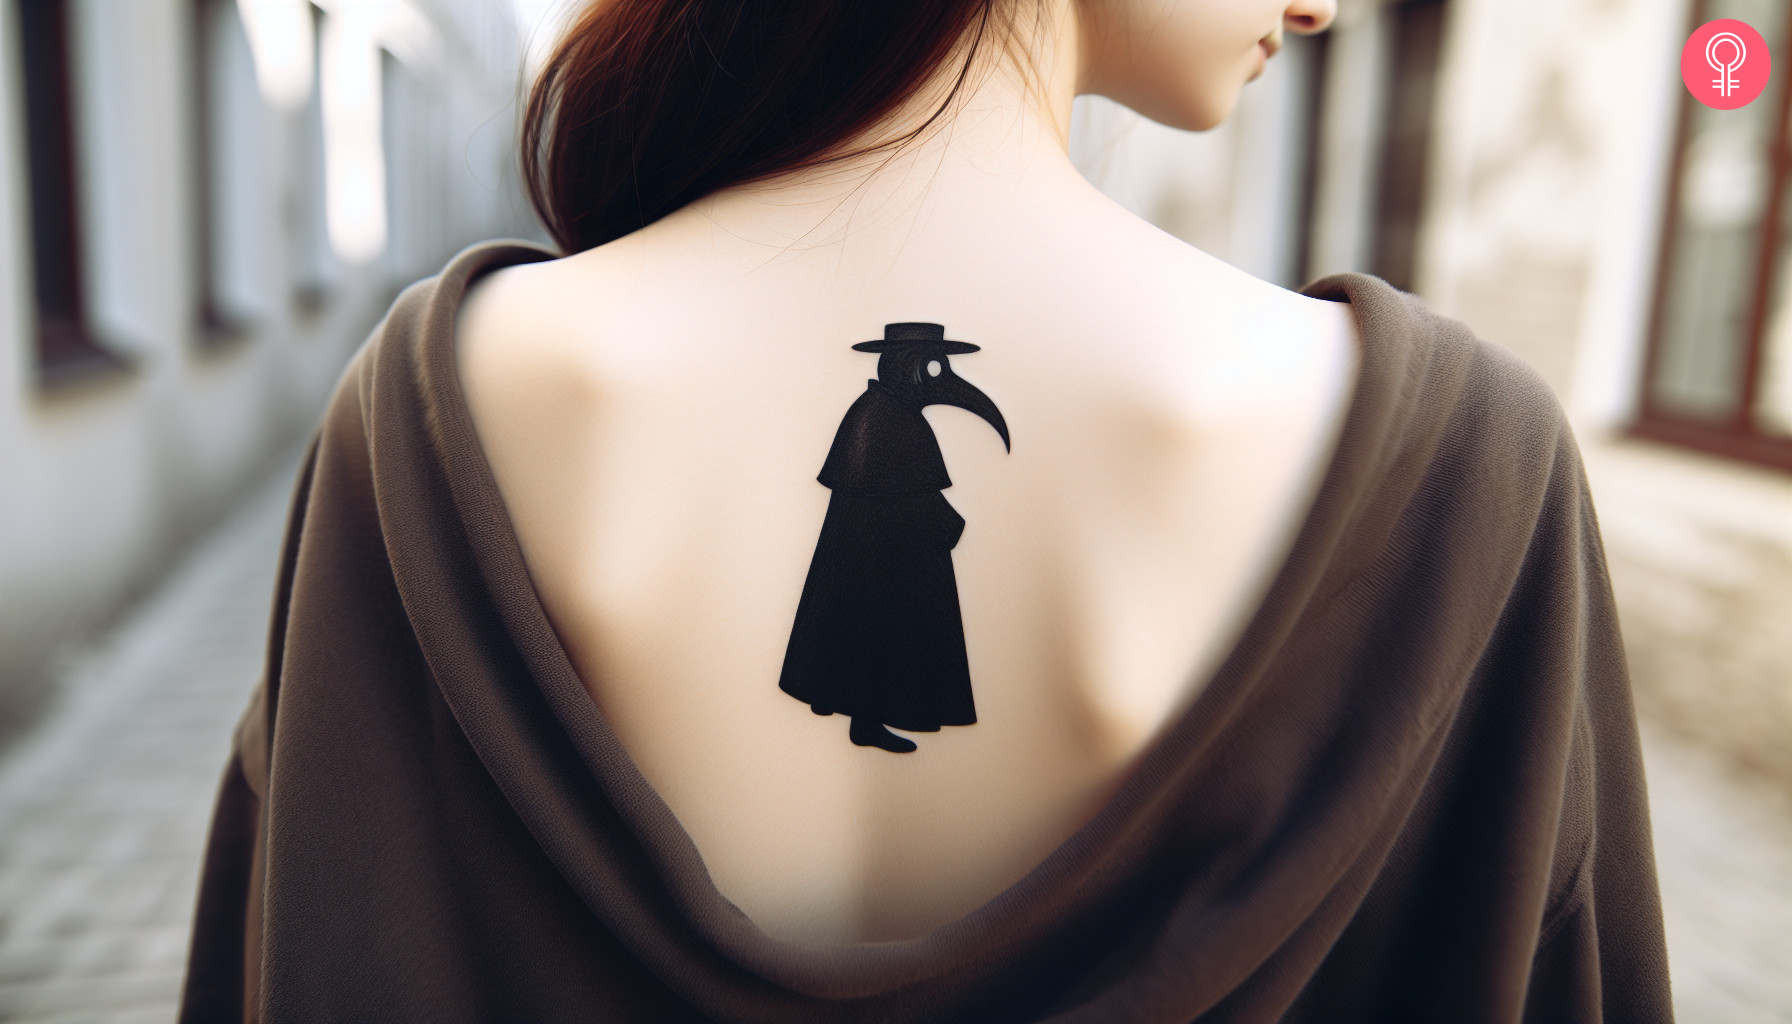 A plague doctor tattoo silhouette on a woman’s back